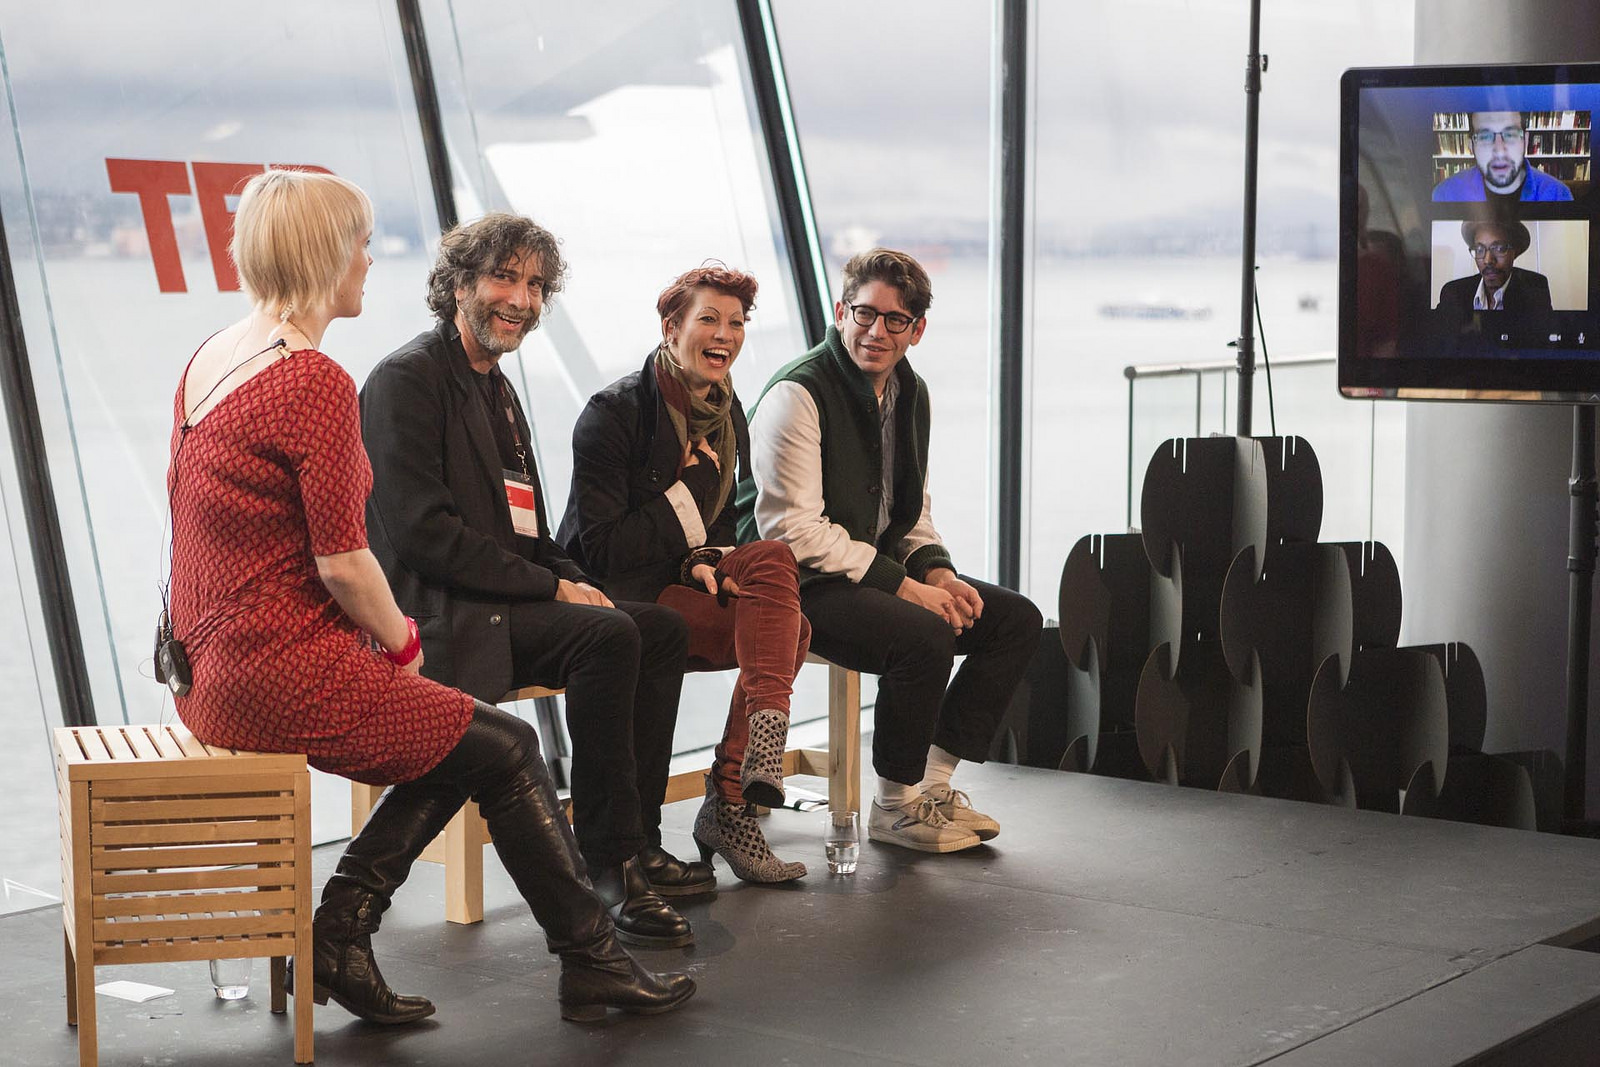 At the Skype Studio, Helen Walters interviews Neil Gaiman, Amanda Palmer and many others about Connection, Crowd-funding and Creativity. Photo: Bret Hartman